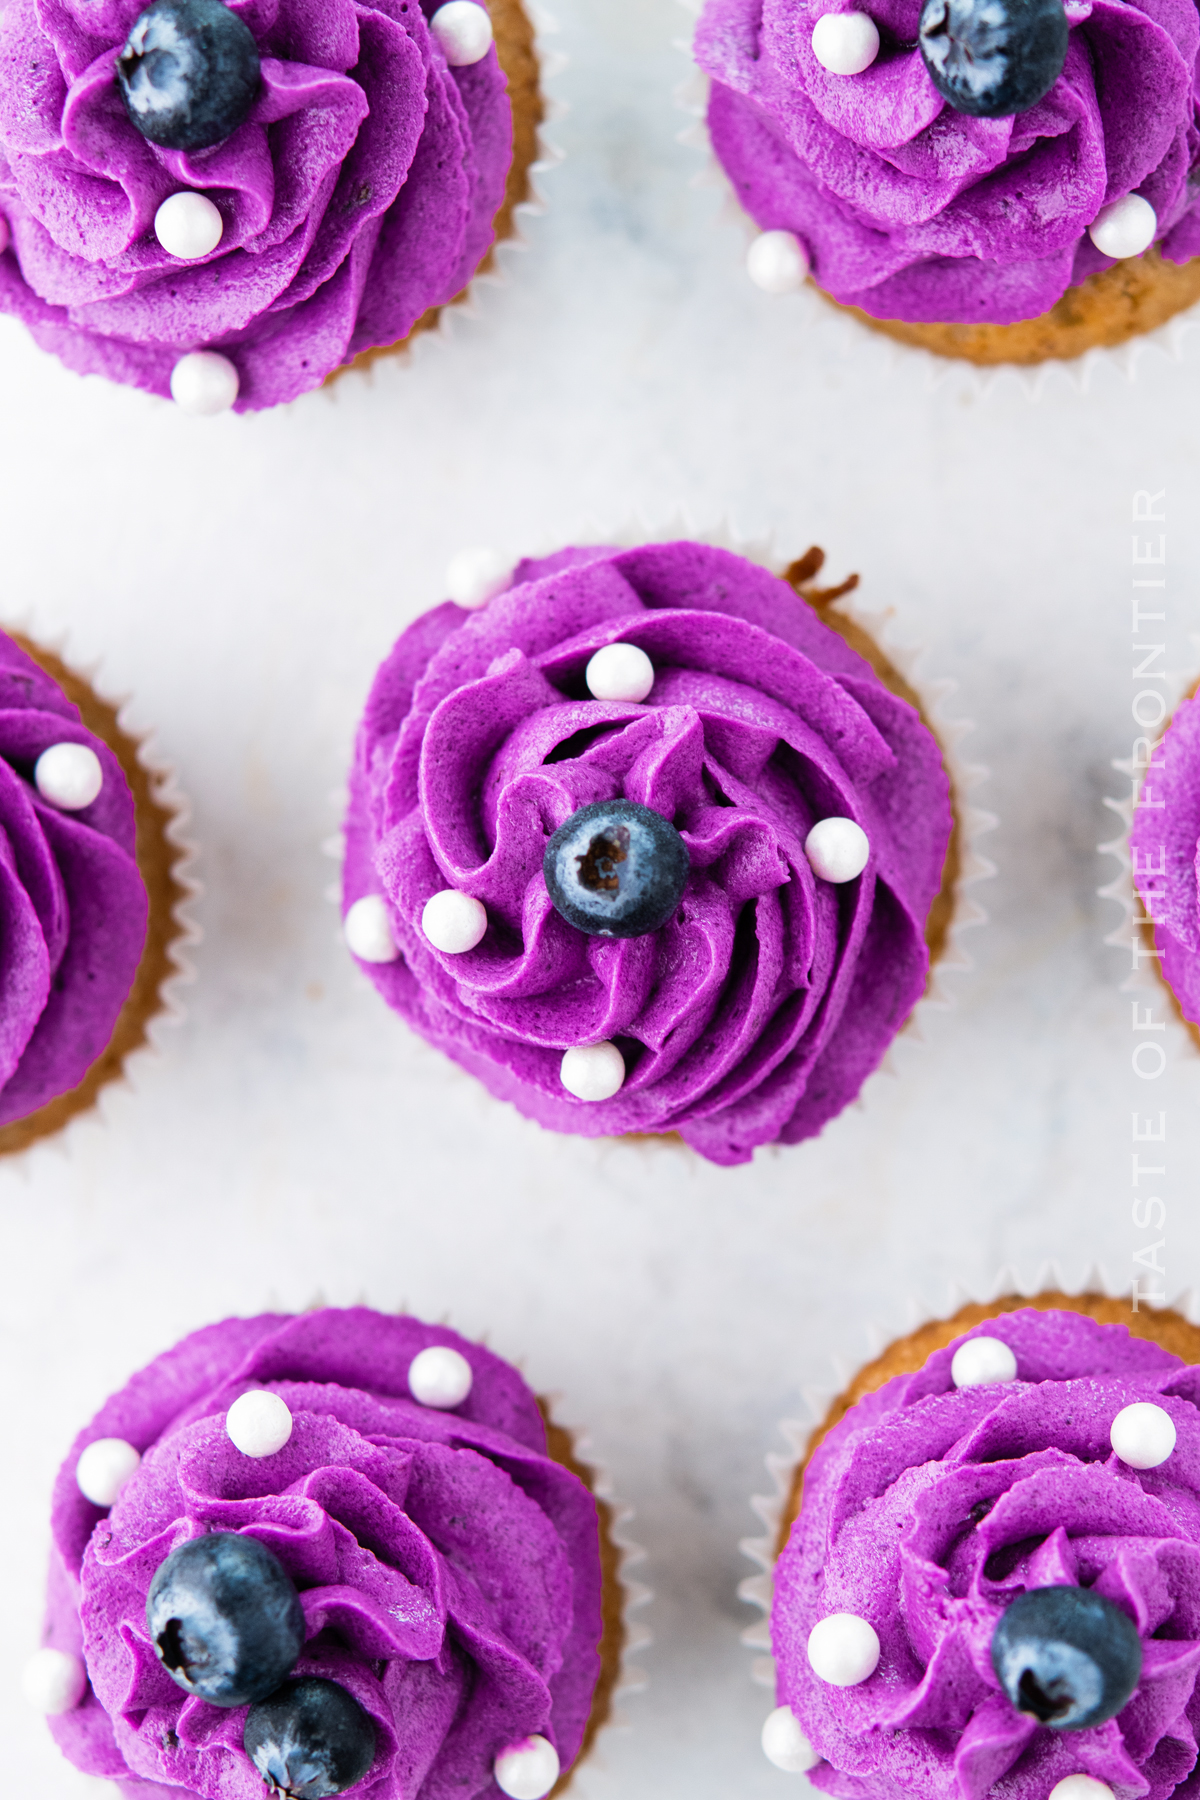 Recipe for Blueberry Cupcakes with Blueberry Frosting